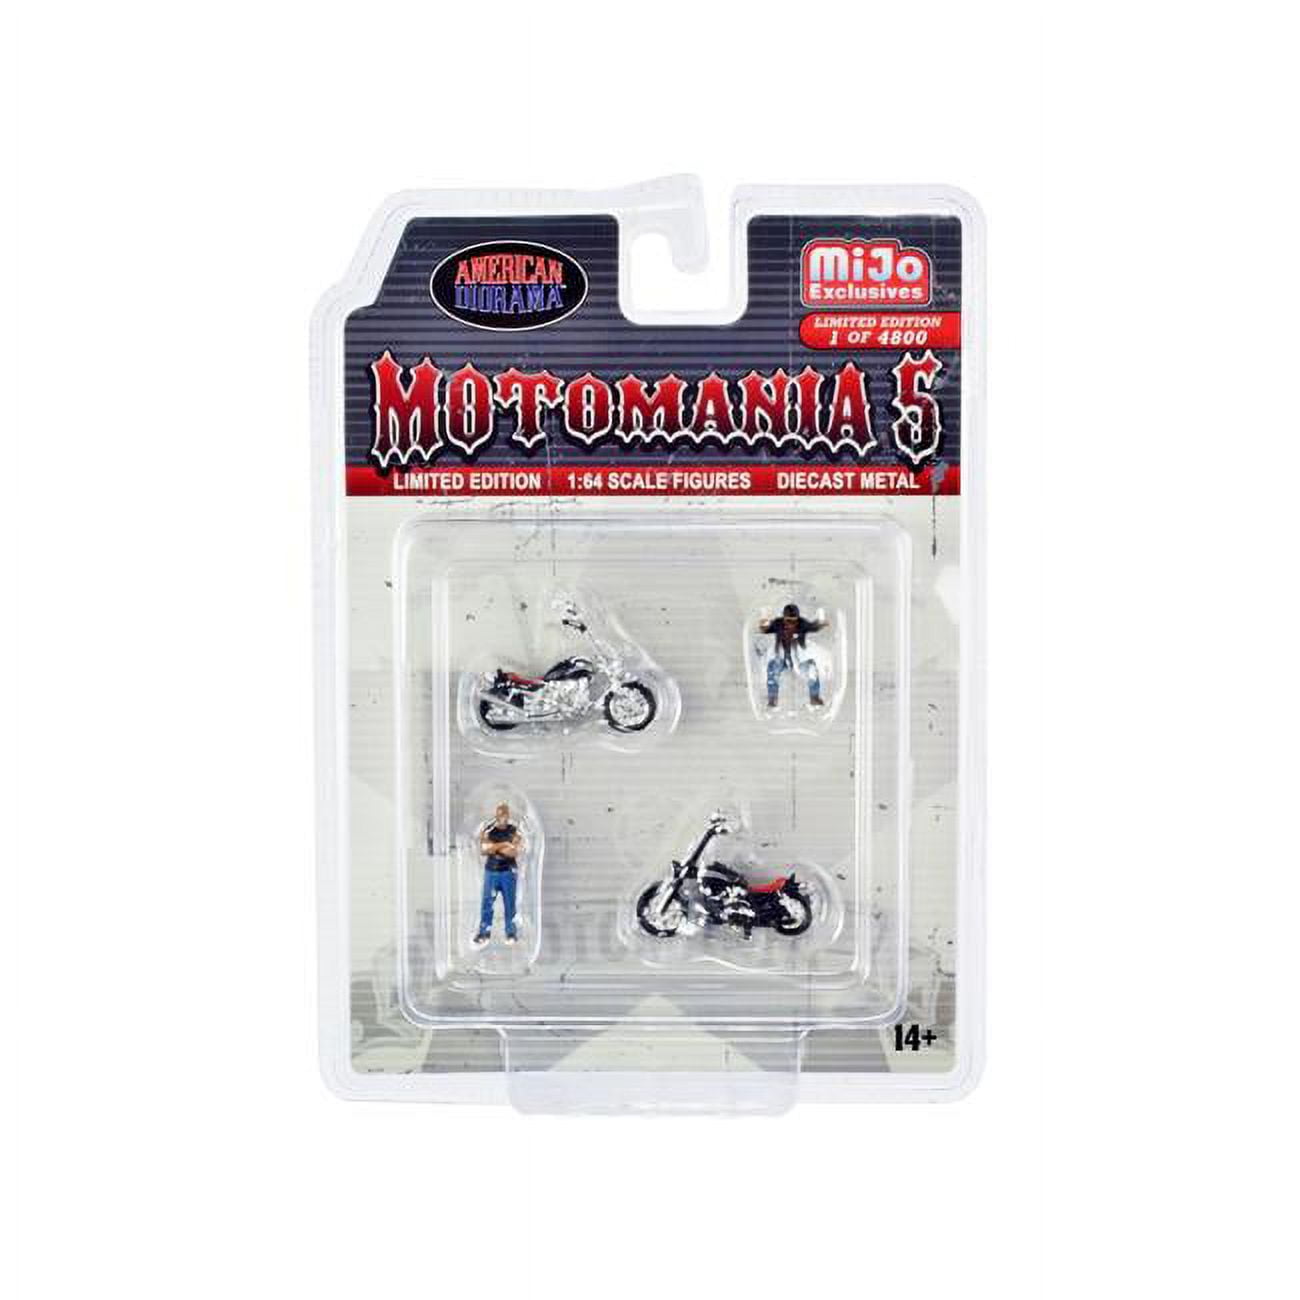 Picture of American Diorama AD-76512MJ Motomania 5 Diecast & 2 Motorcycles Limited Edition to Worldwide for 1 by 64 Scale Models Figures - Set of 2 - 4800 Piece